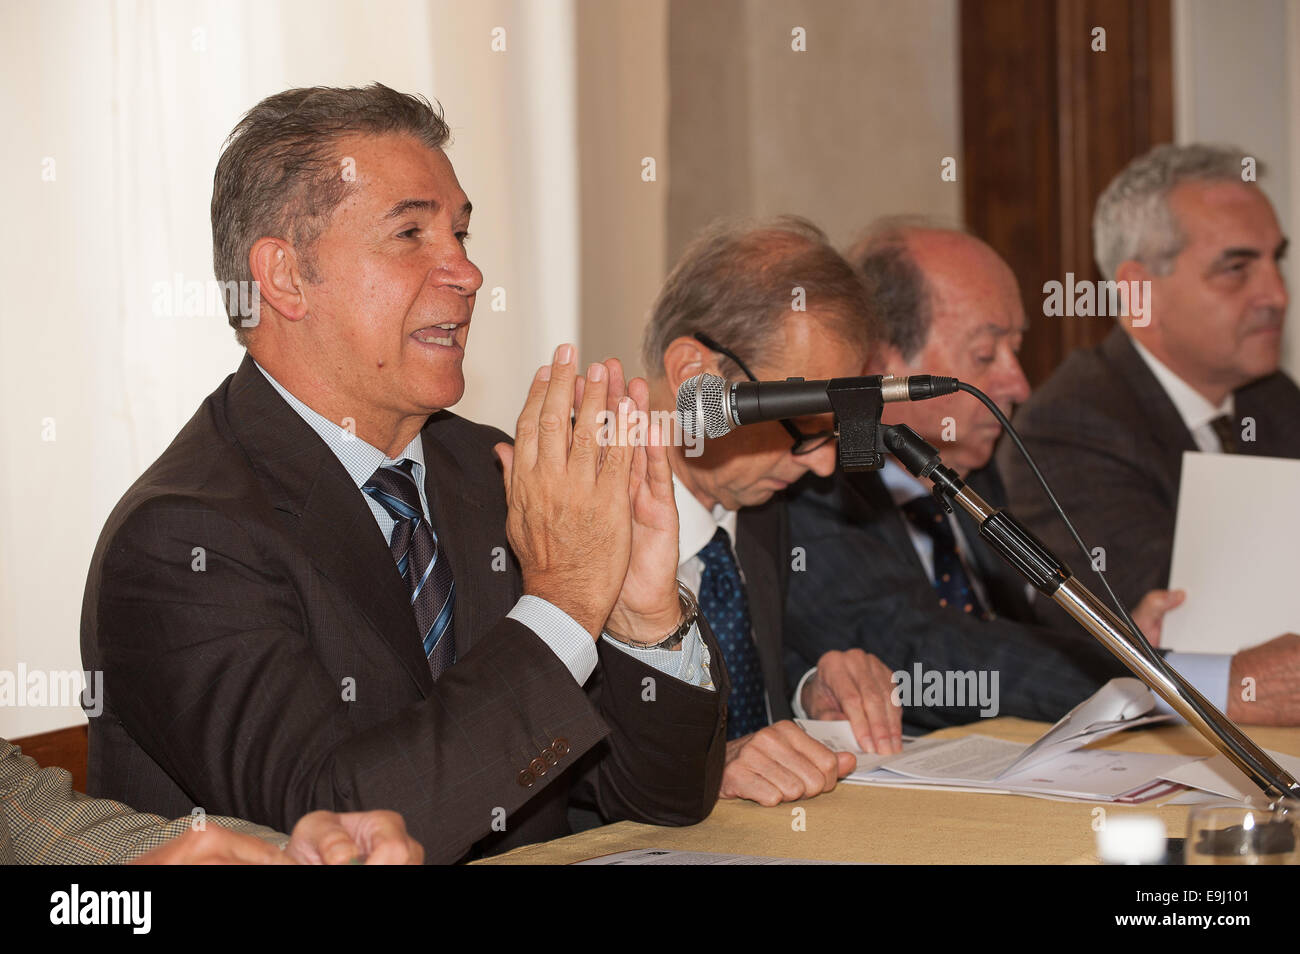 Turin, Italy. 28th October, 2014. Presentation of the exhibition 'Leonardo and the treasures of the king,' At the inauguration, which took place at the palace Chiablese, was attended by the Mayor of the City of Torino Piero Fassino, Giovanni Saccani director of the Royal Library of Turin, Maurizio Cibrario president the Consulta of Turin Mario Turetta Regional Director for Cultural Heritage and Landscape of Piedmont, Marco Mezzalama Compagnia di San Paolo, Fondazione CRT Anna Chiara Invernizzi and Marcella Gaspardone, Marketing Director of Turismo Torino. Credit:  Realy Easy Star/Alamy Live Ne Stock Photo